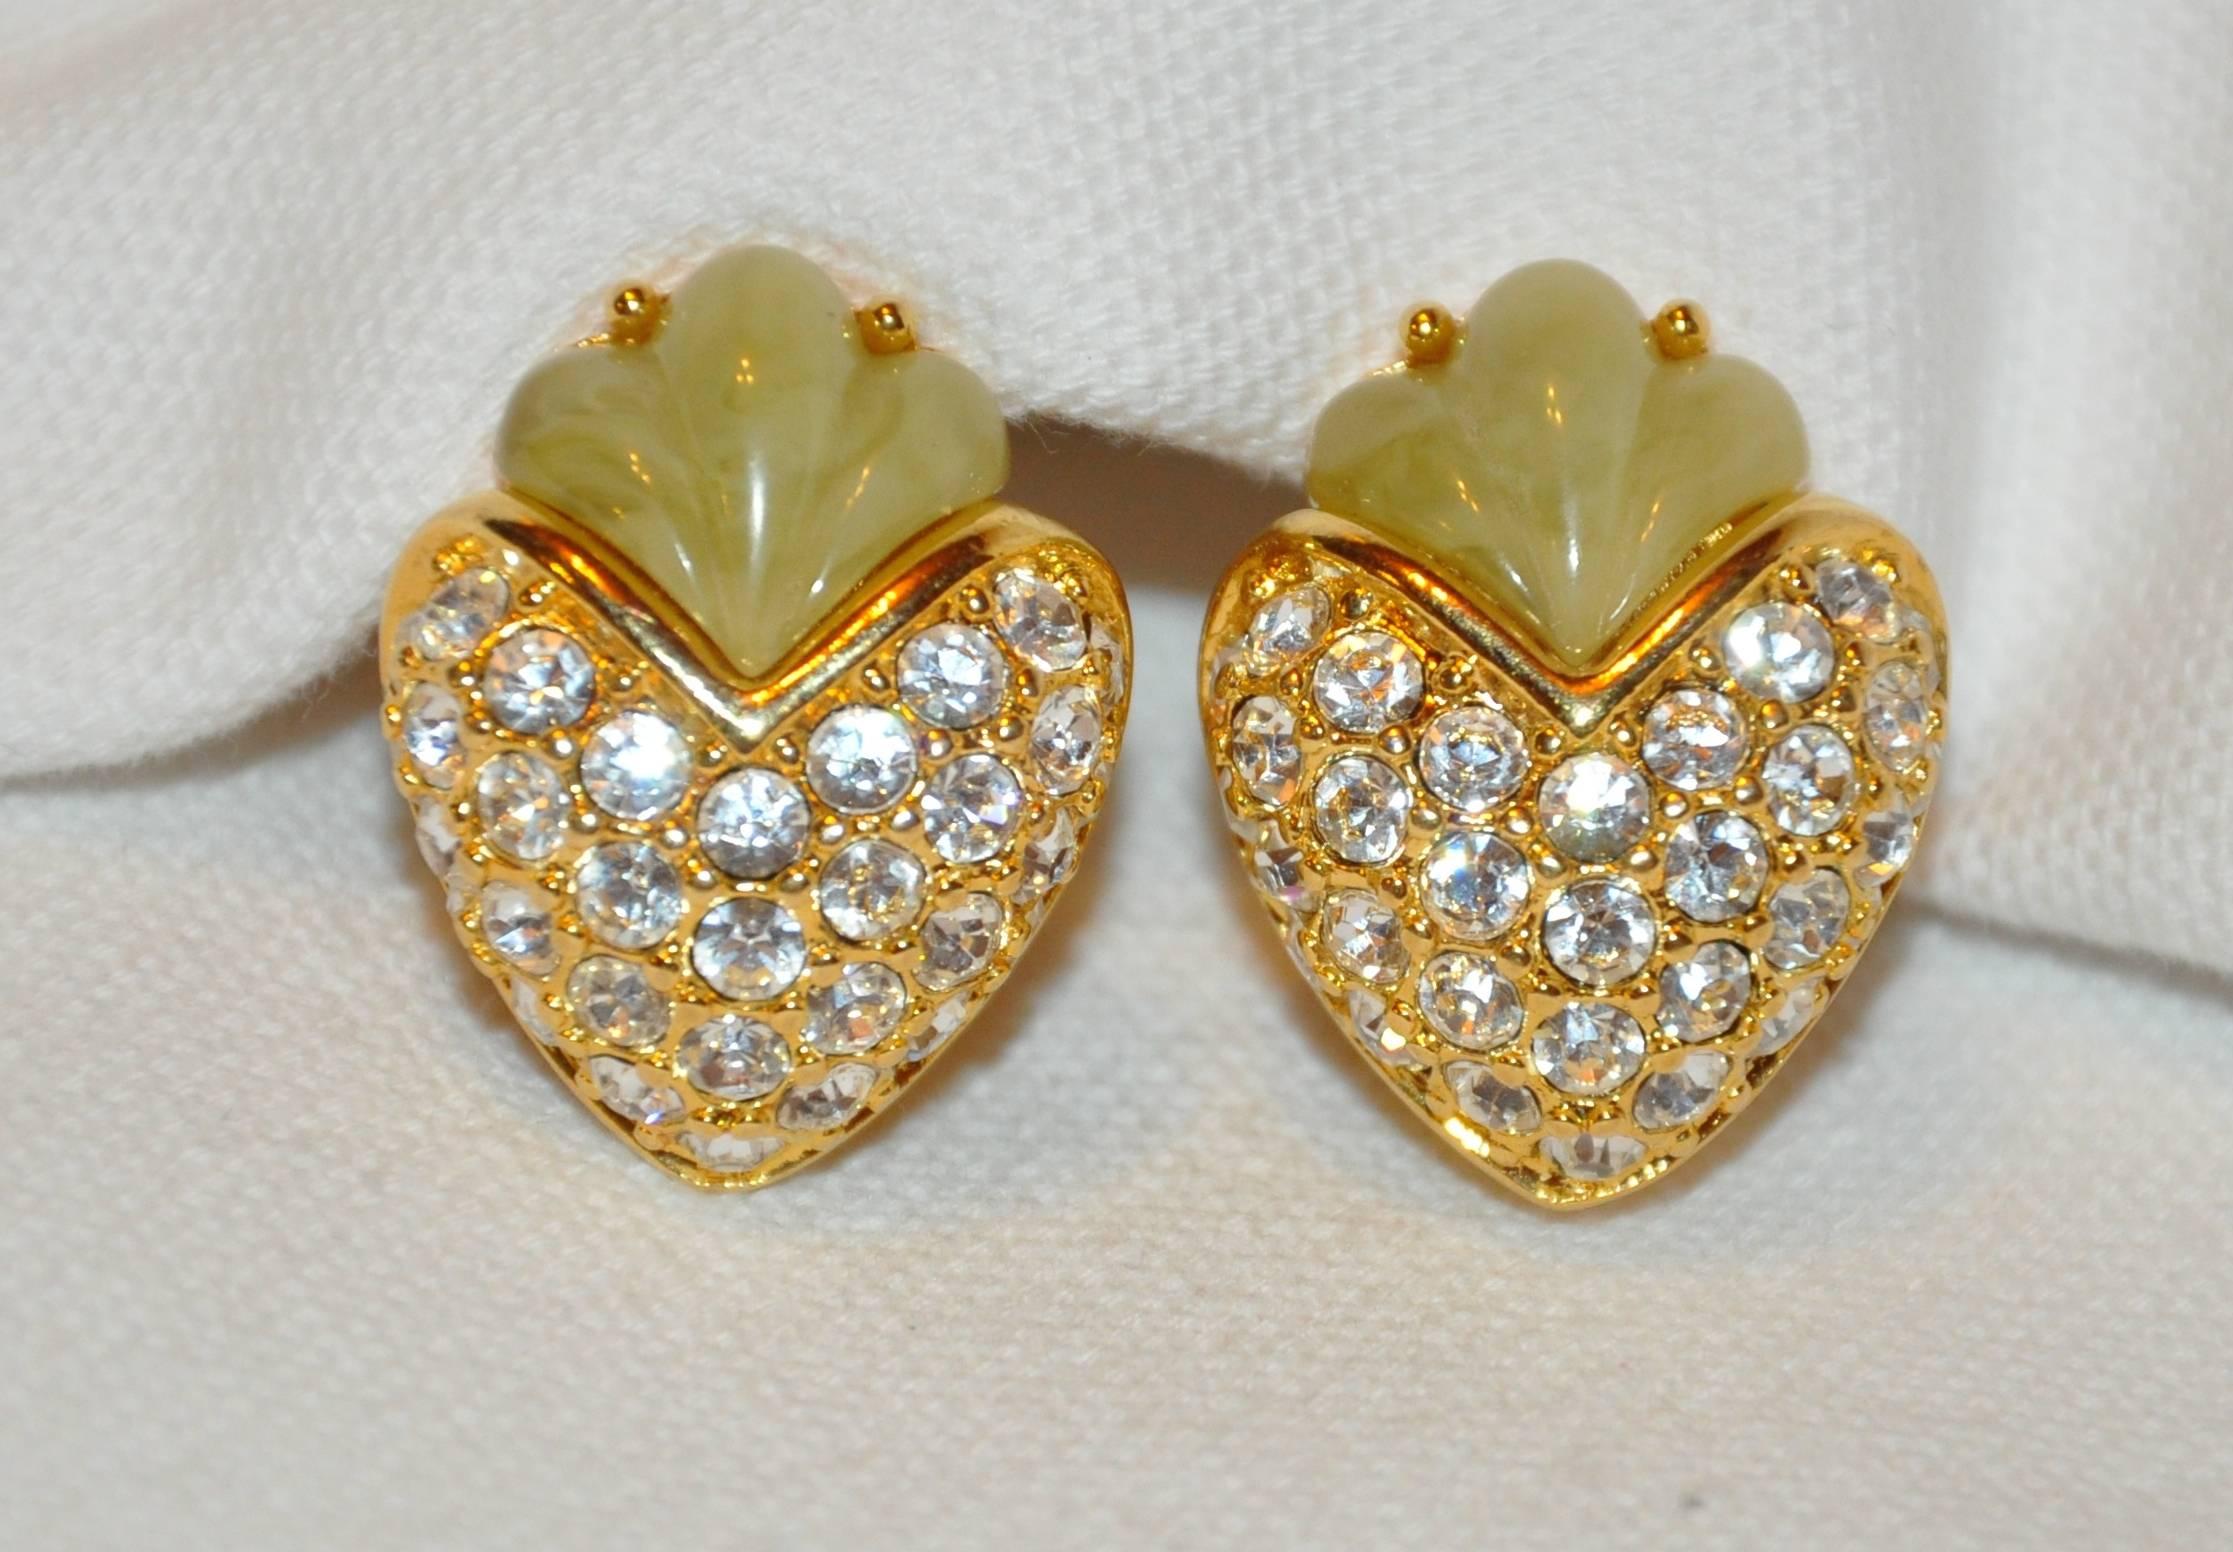      Simply elegant, these "Chestnut"style clip-on earrings of gilded polish gold vermeil hardware is accented with faux jadeite and rhinestones. They measure 1" x 6/8". Made in USA.